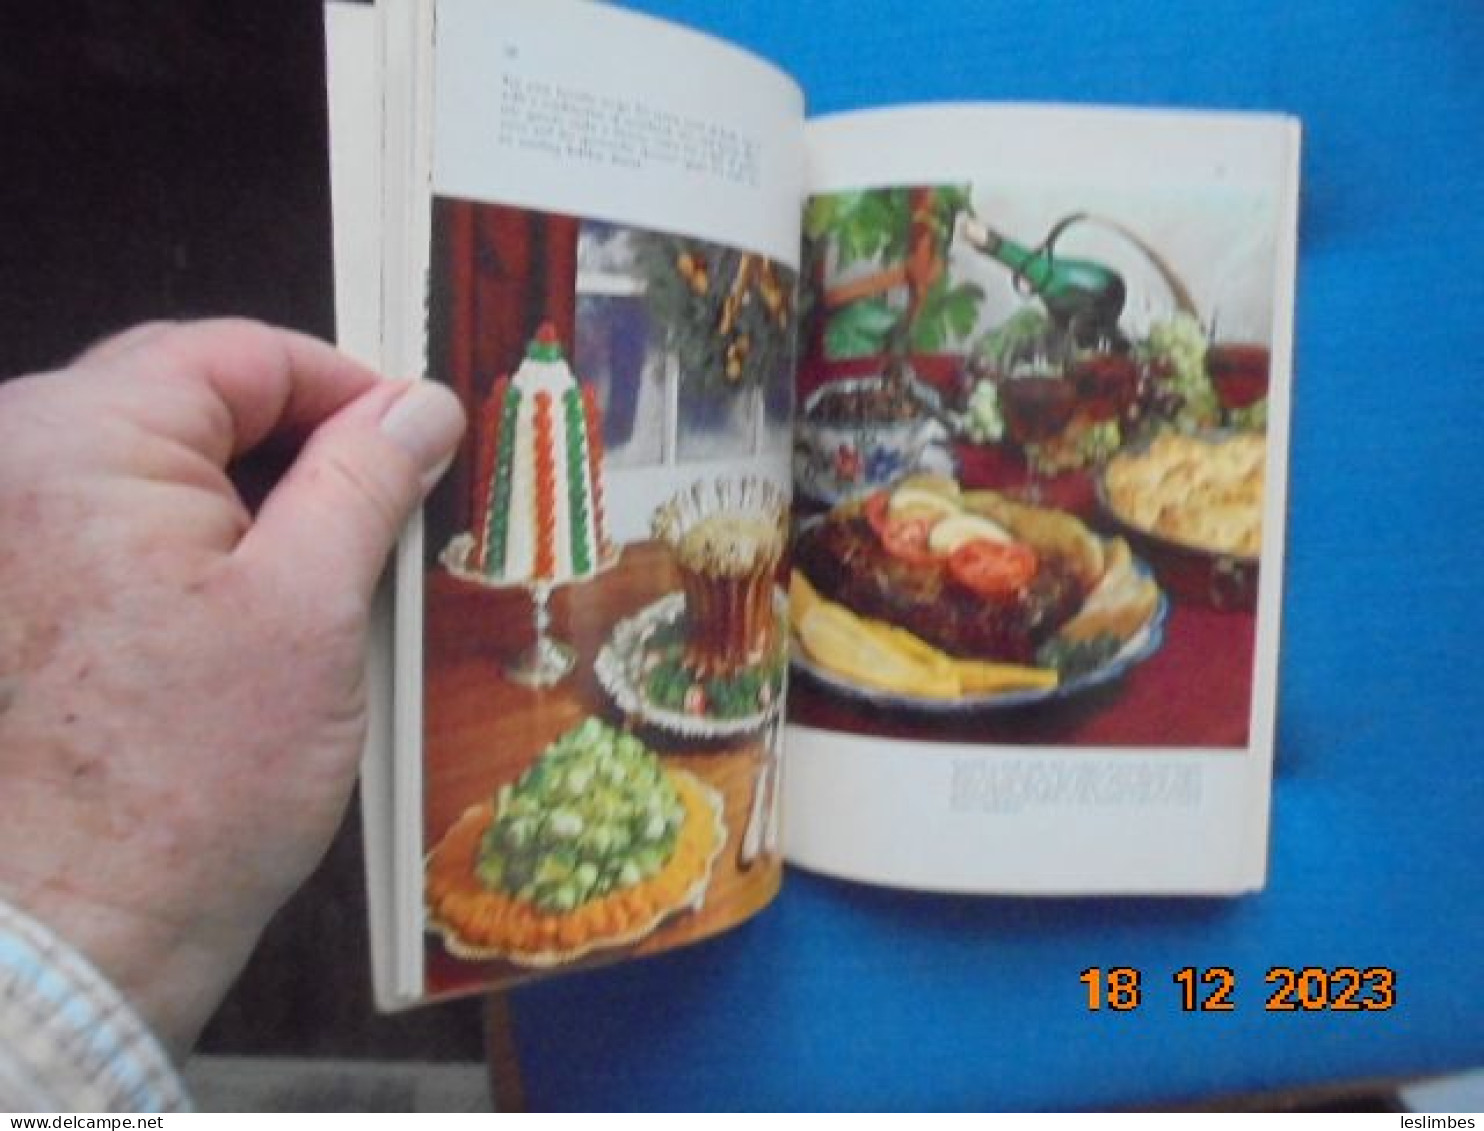 Serving Food Attractively - Florence Brobeck, Nelson Doubleday, Inc. 1966 - Nordamerika